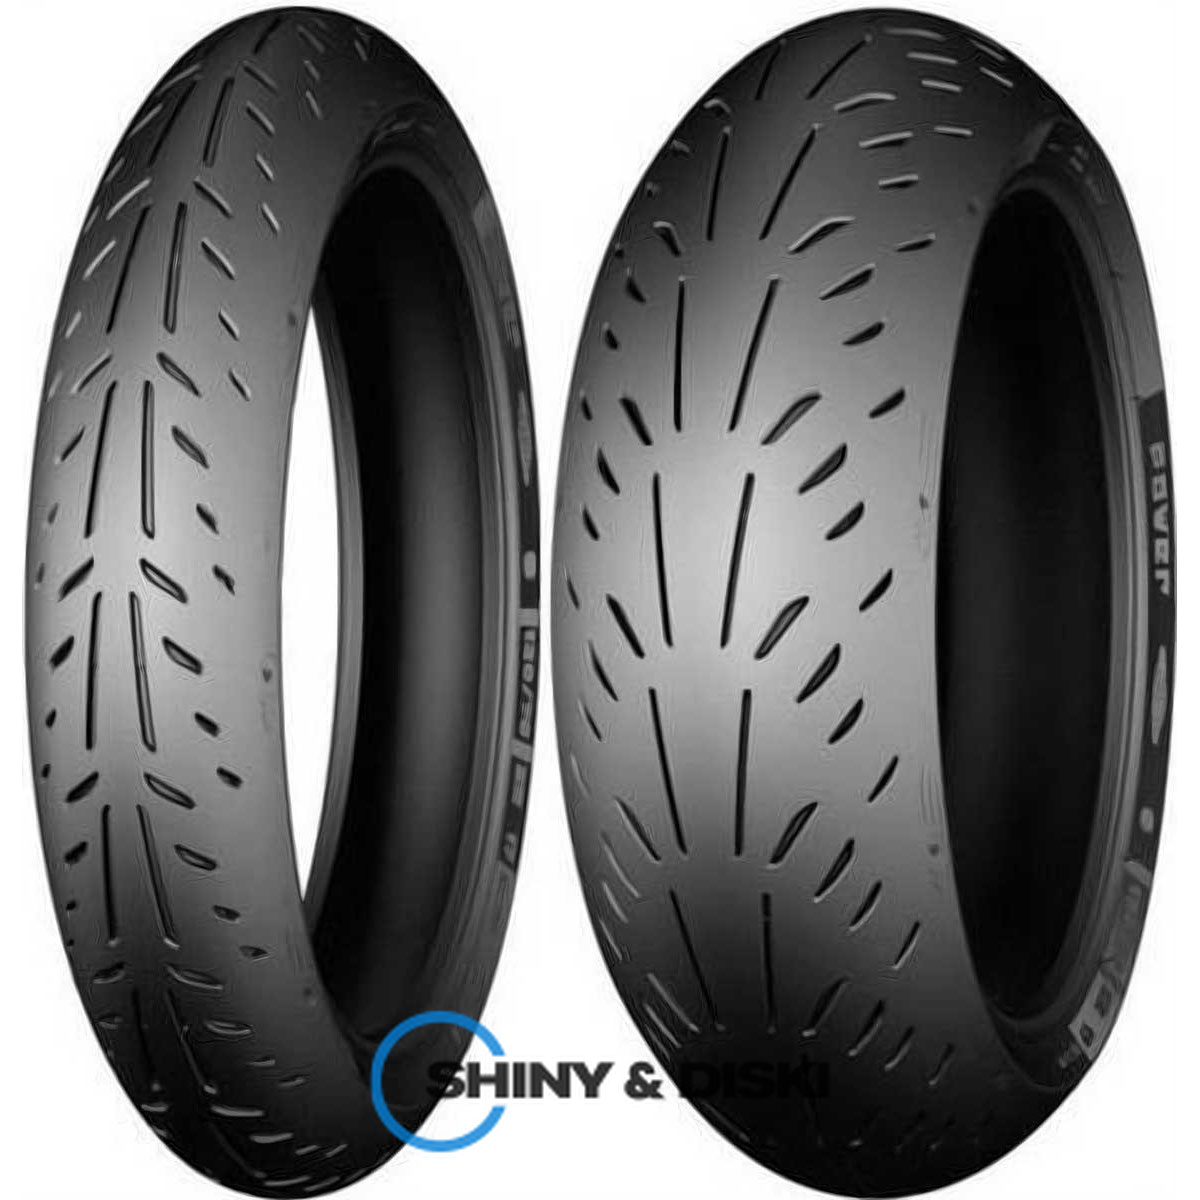 michelin power cup 120/70 r17 58v